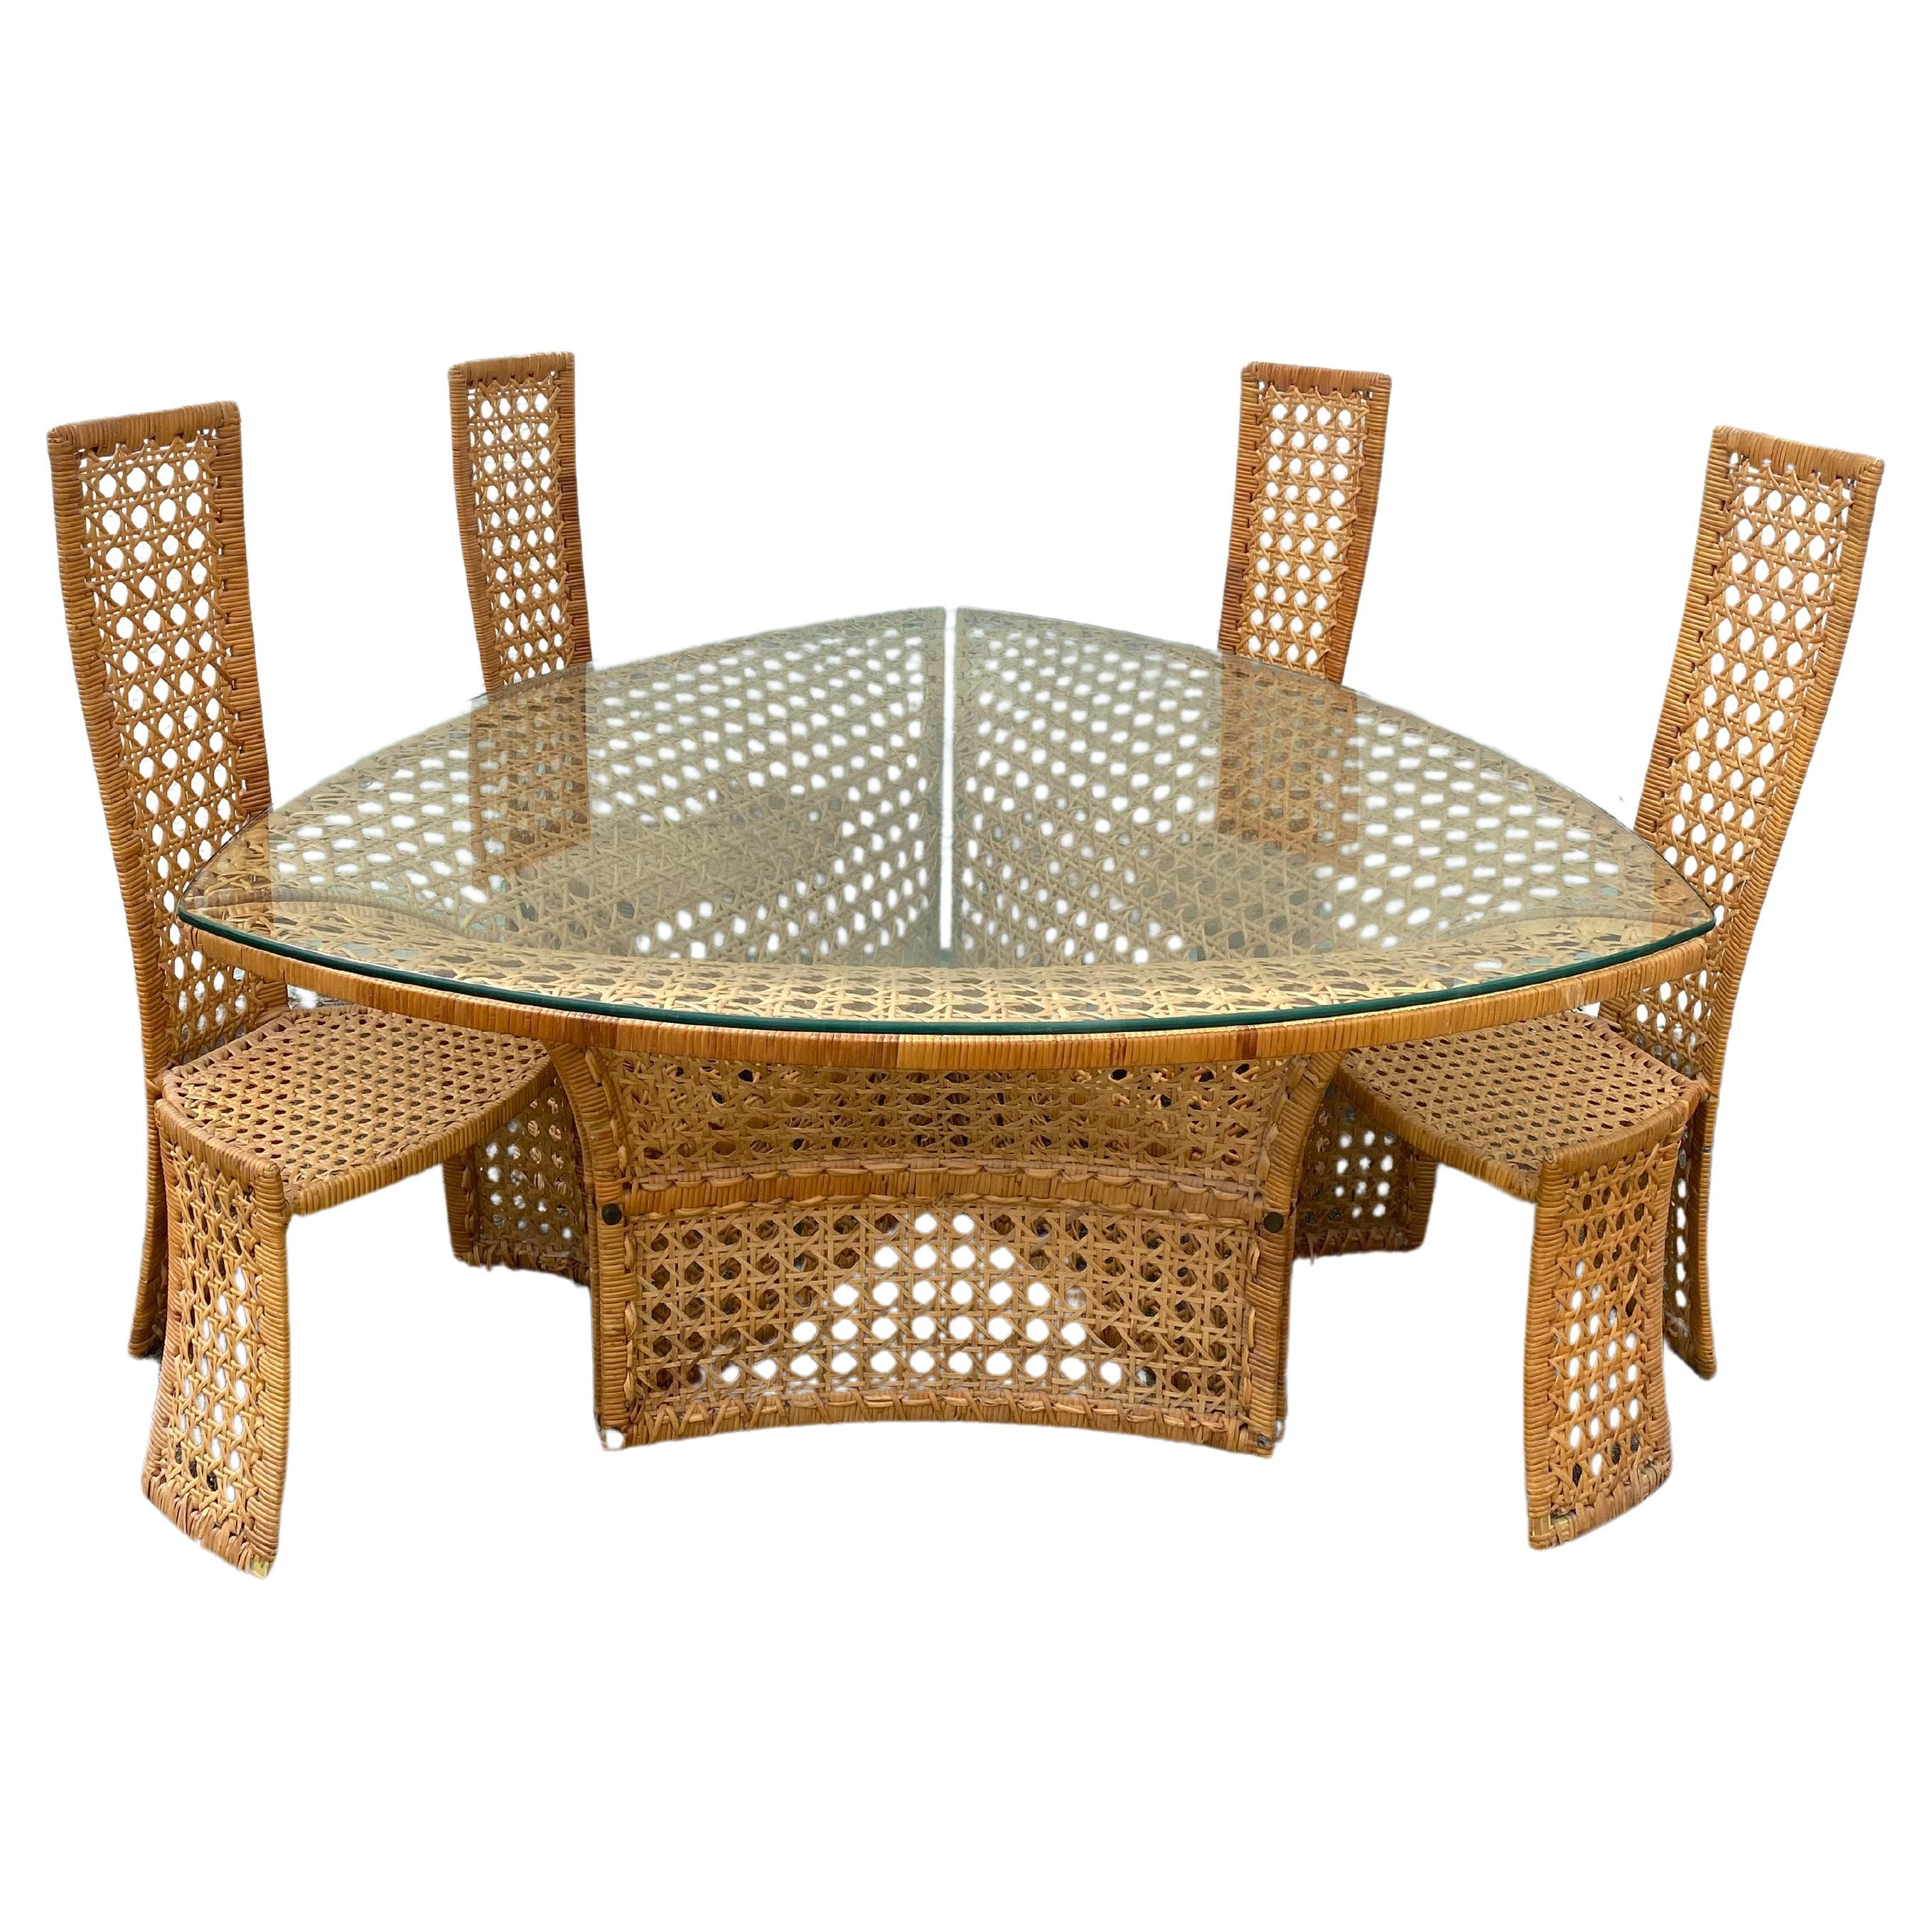 1970s Danny Ho Sculptural Rattan Dining Table and Chairs, Set of 5 For Sale